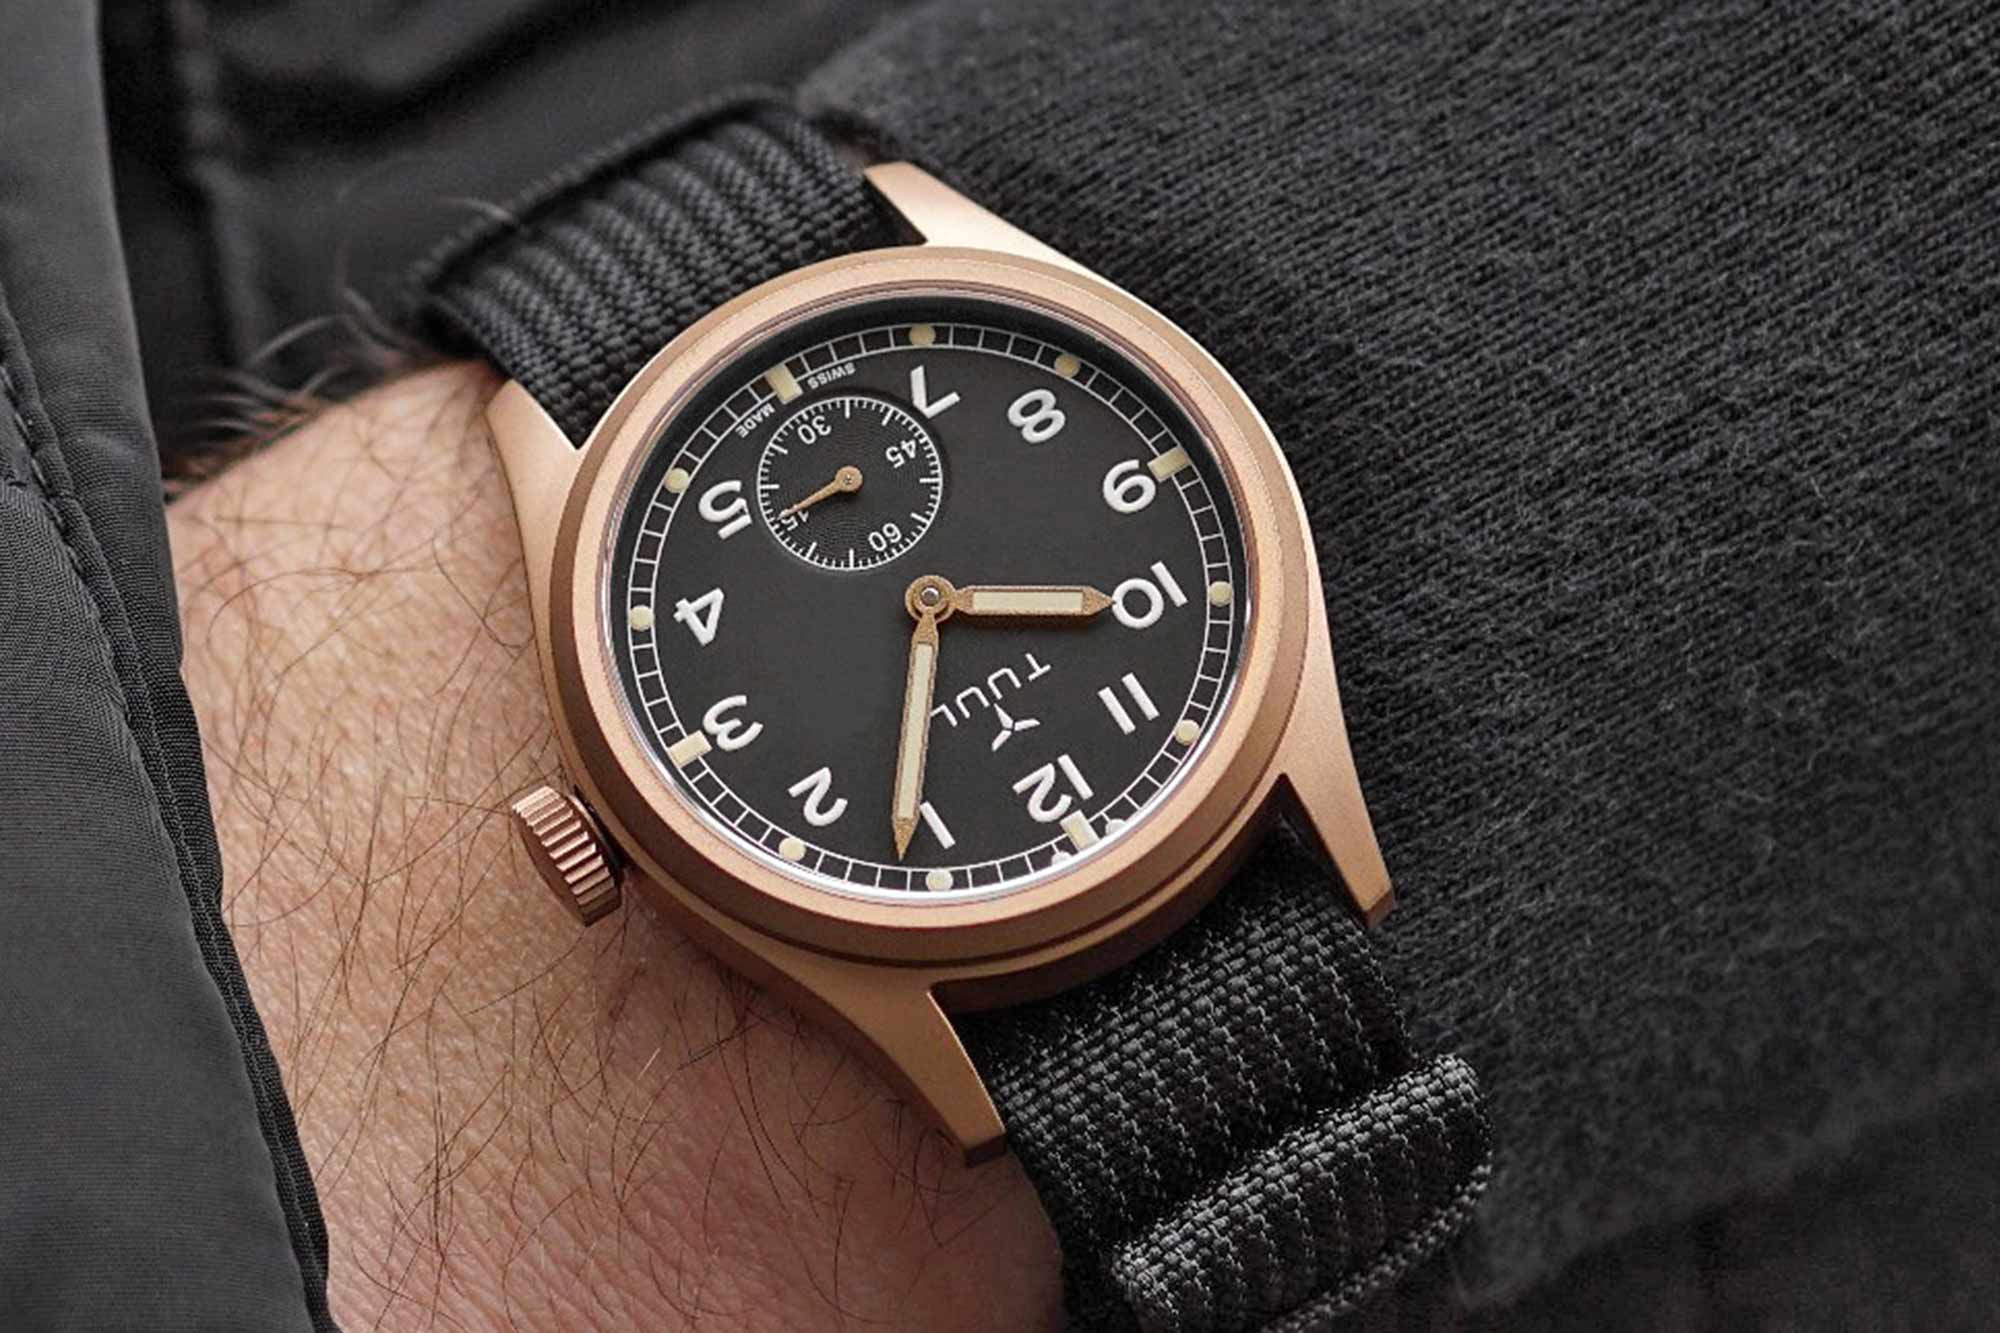 Tuul Launches the Filthy 13, a New Take on the Classic Military Spec Tool Watch